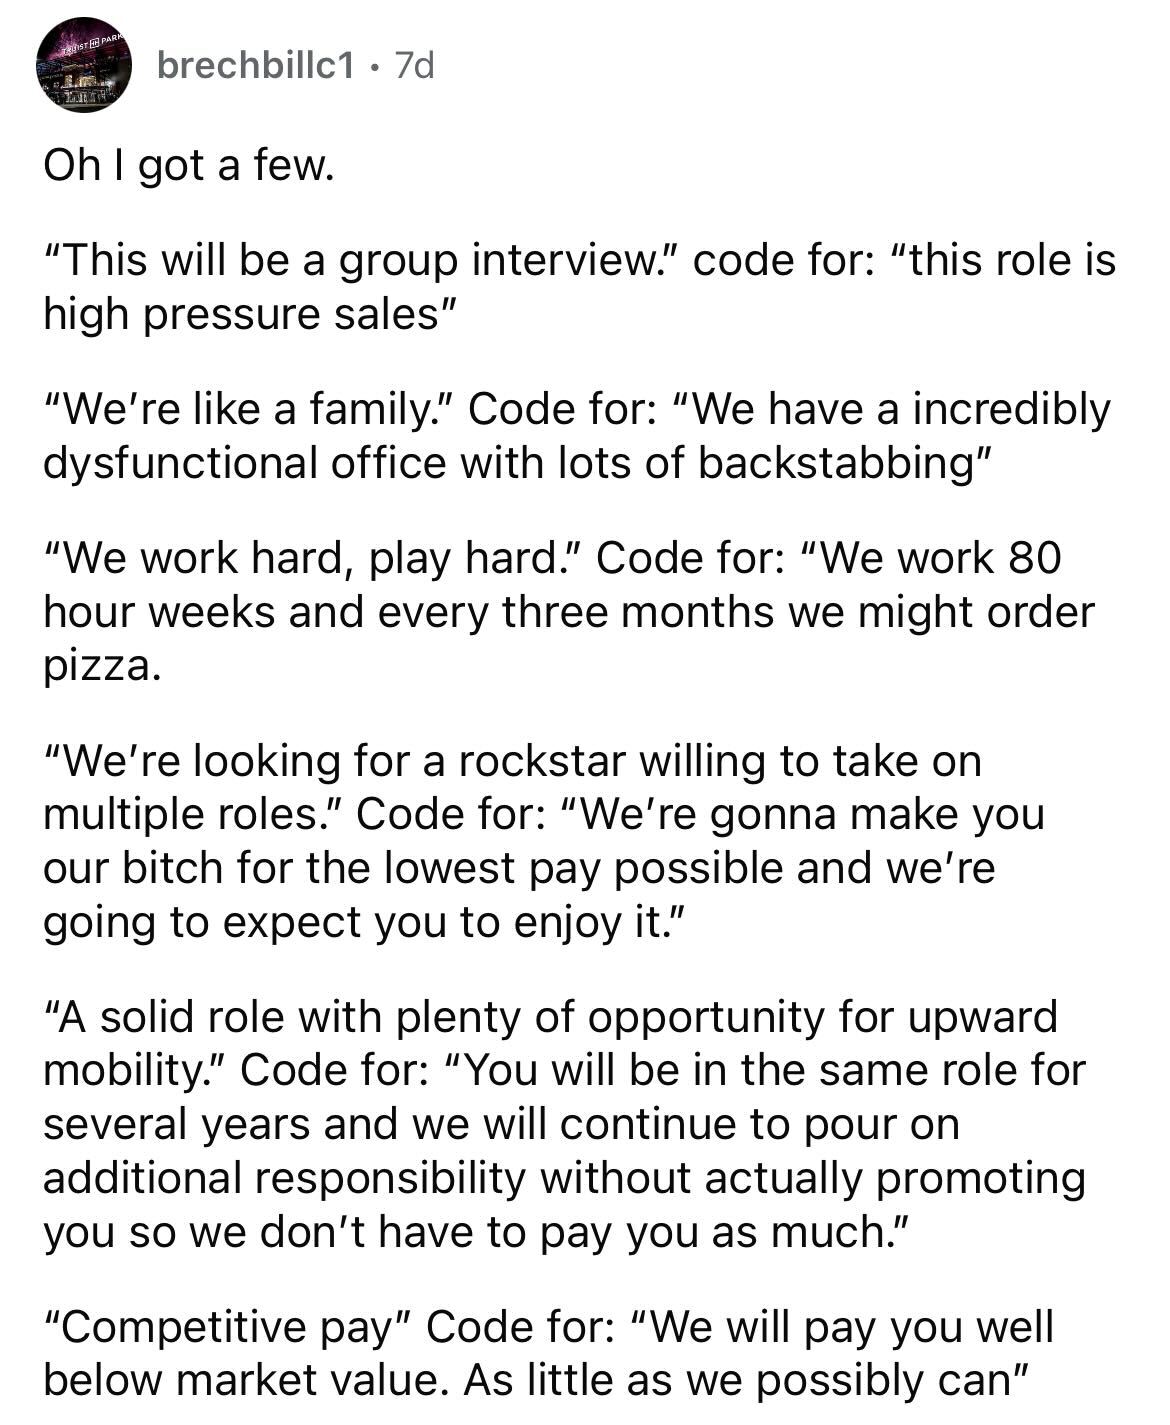 job posting red flags you should avoid - document - brechbillc1 7d Oh I got a few. "This will be a group interview." code for "this role is high pressure sales" "We're a family." Code for "We have a incredibly dysfunctional office with lots of backstabbin